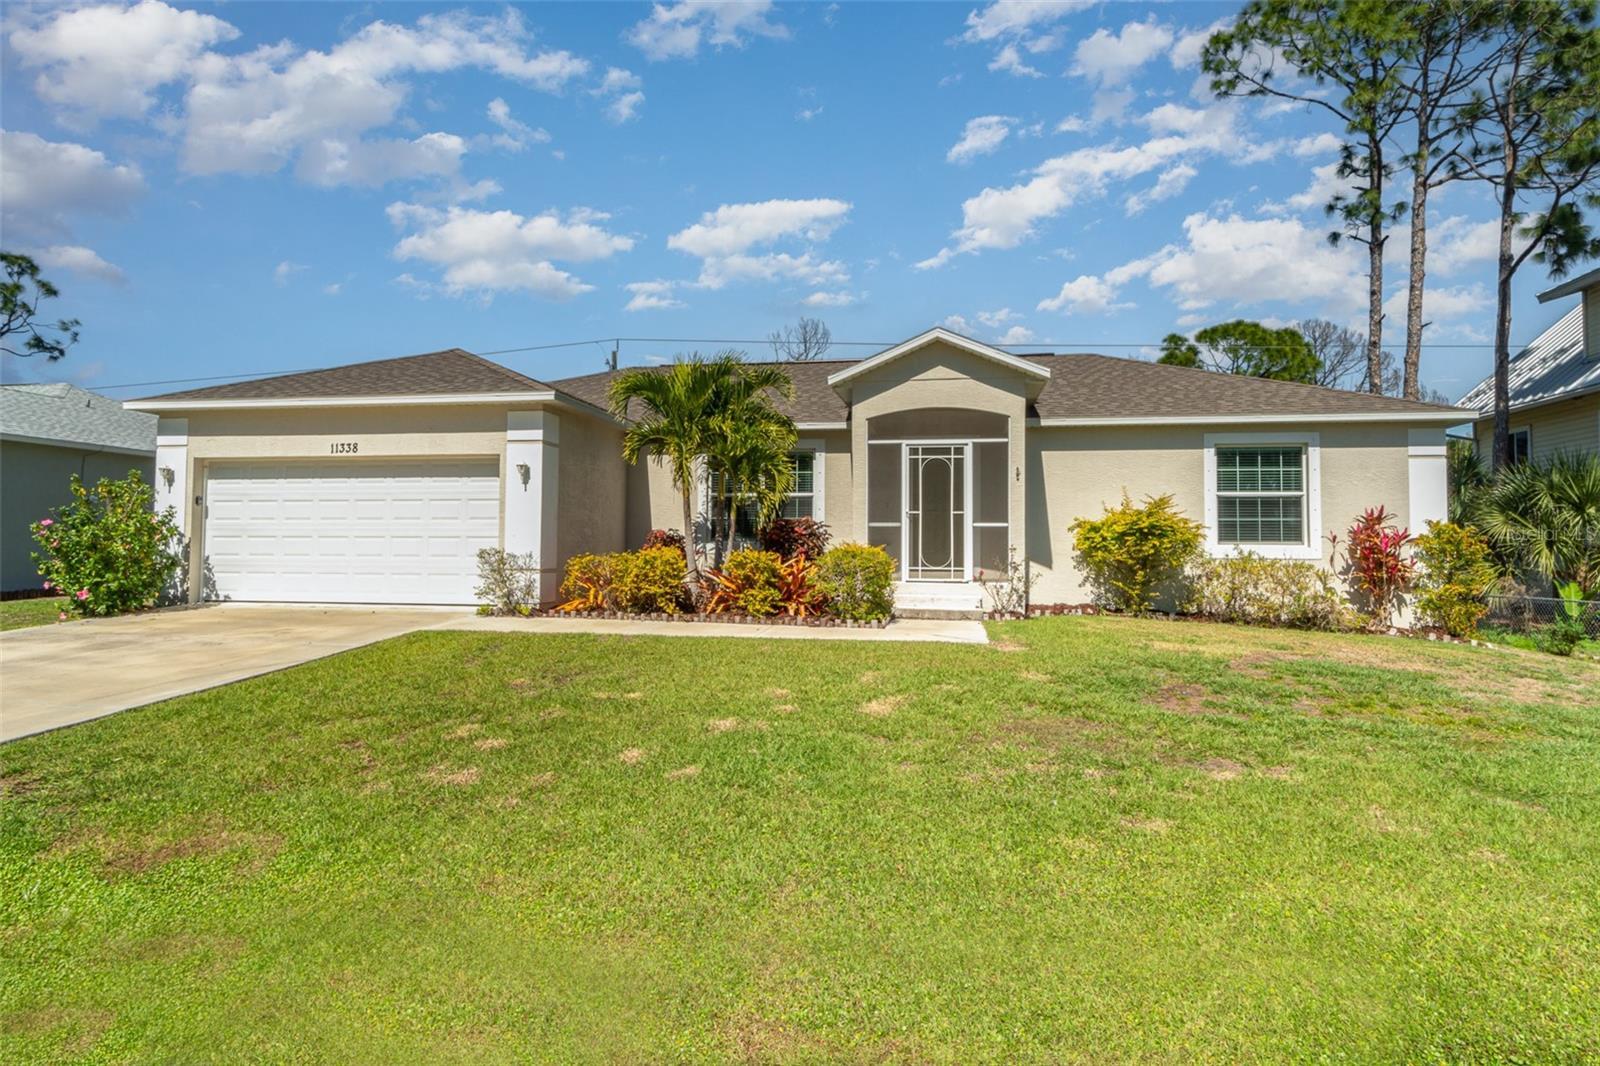 Photo one of 11338 Chalet Ave Englewood FL 34224 | MLS O6181426